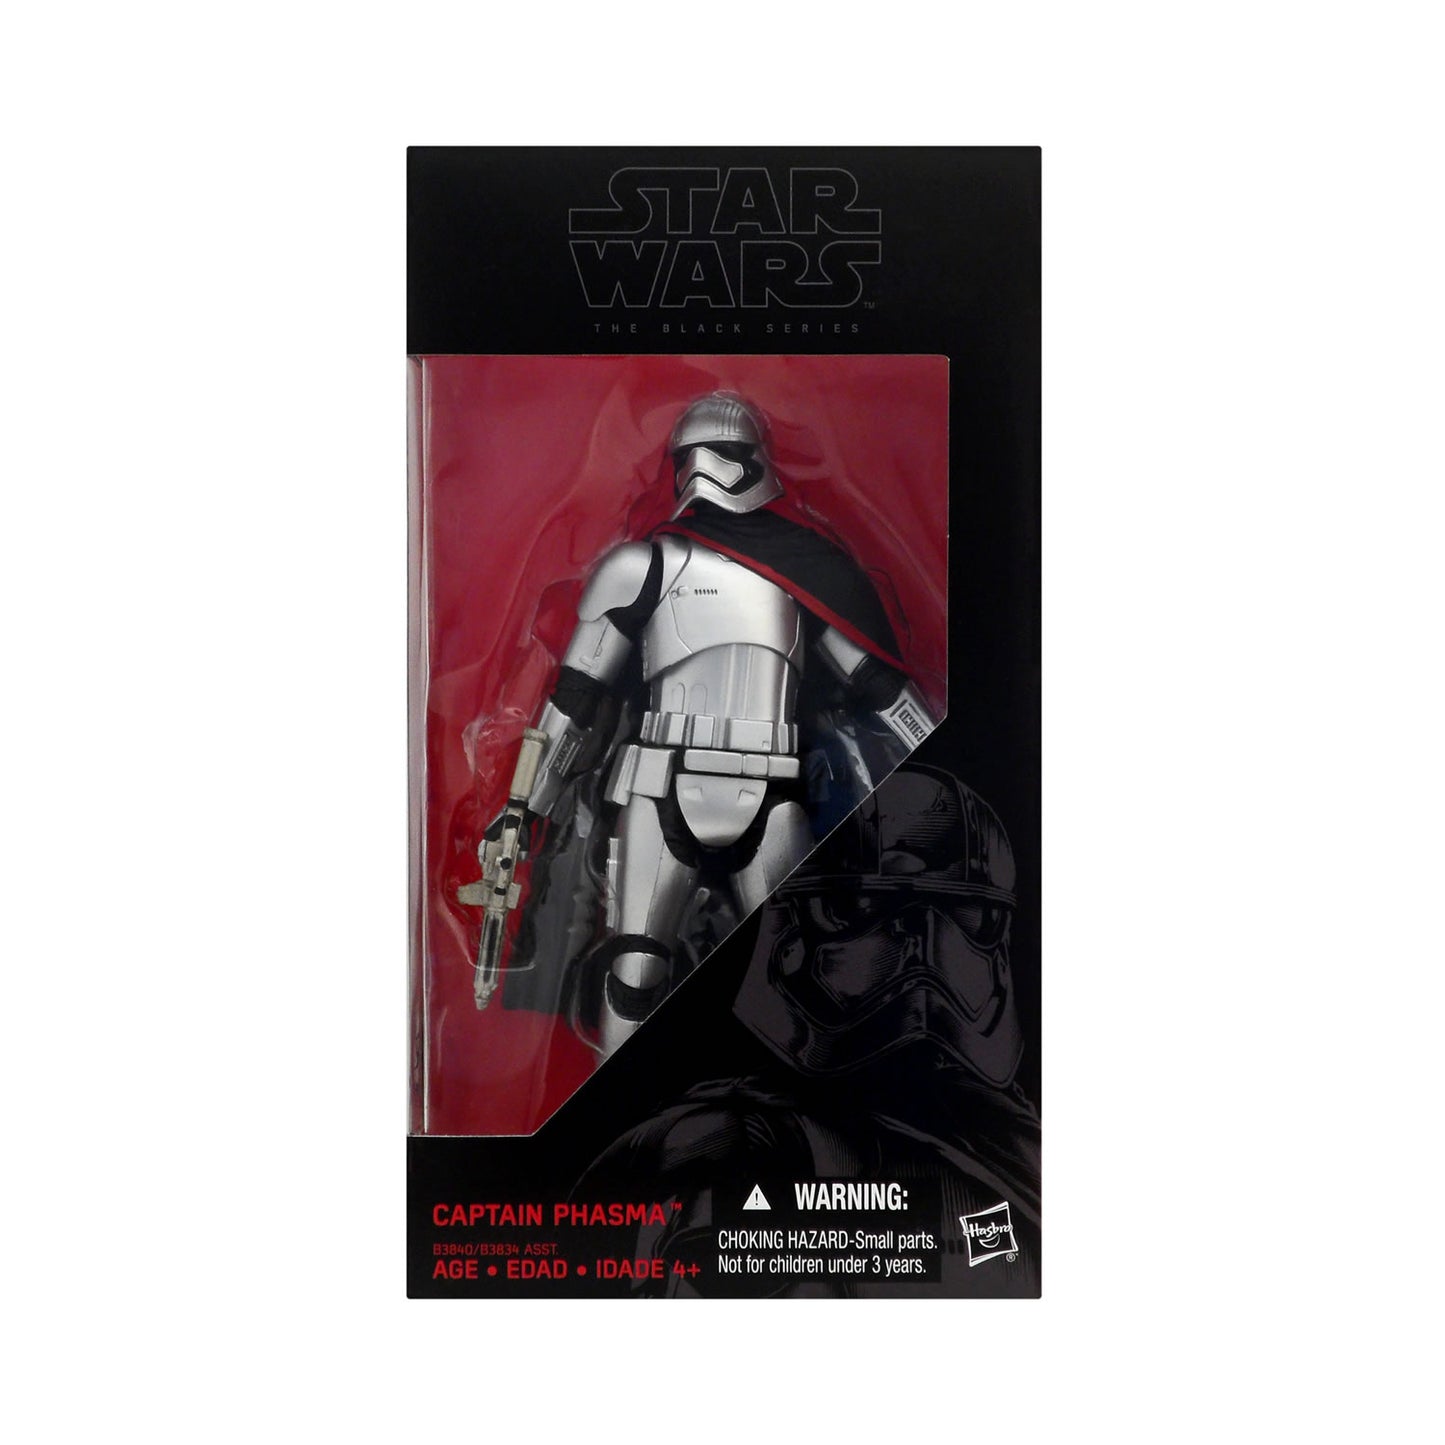 Star Wars: The Black Series Captain Phasma 6-Inch Action Figure